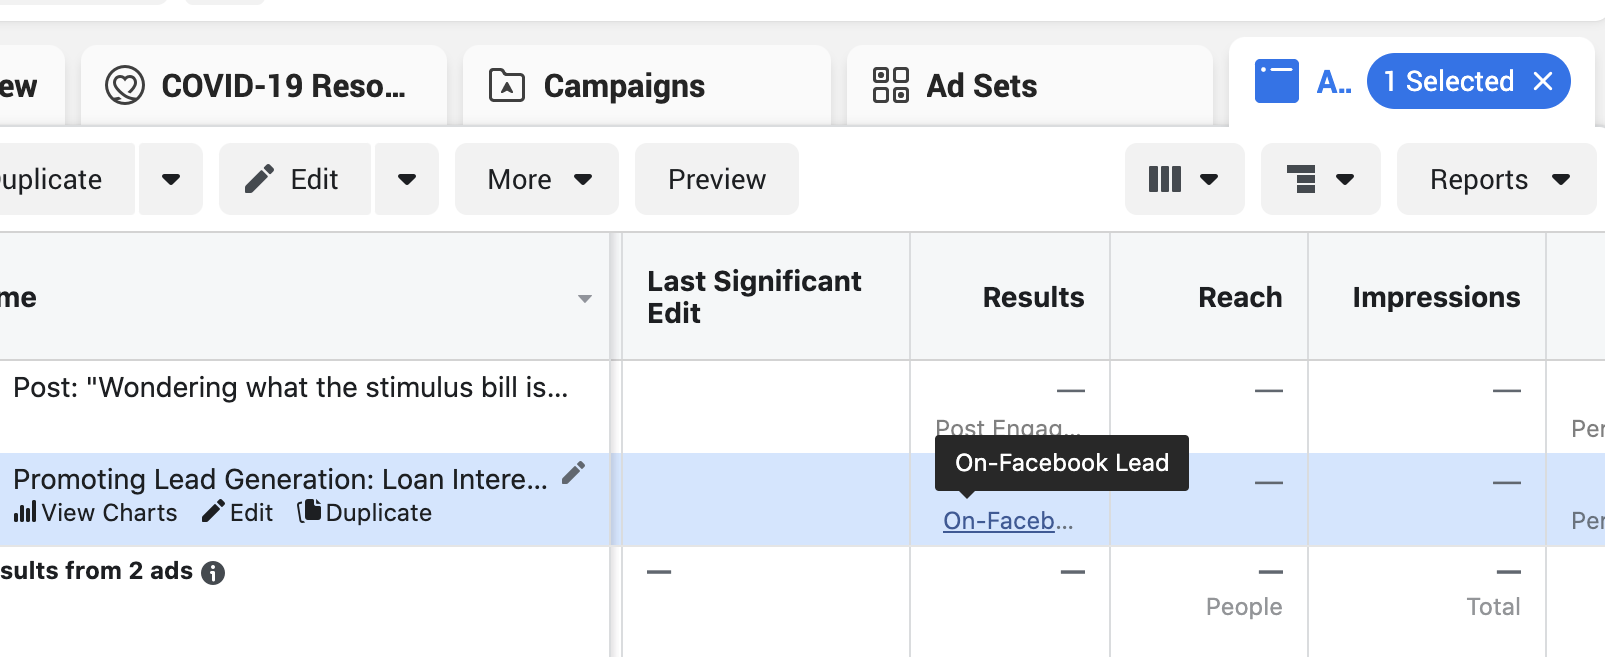 How To Download Facebook Leads From Ads Manager